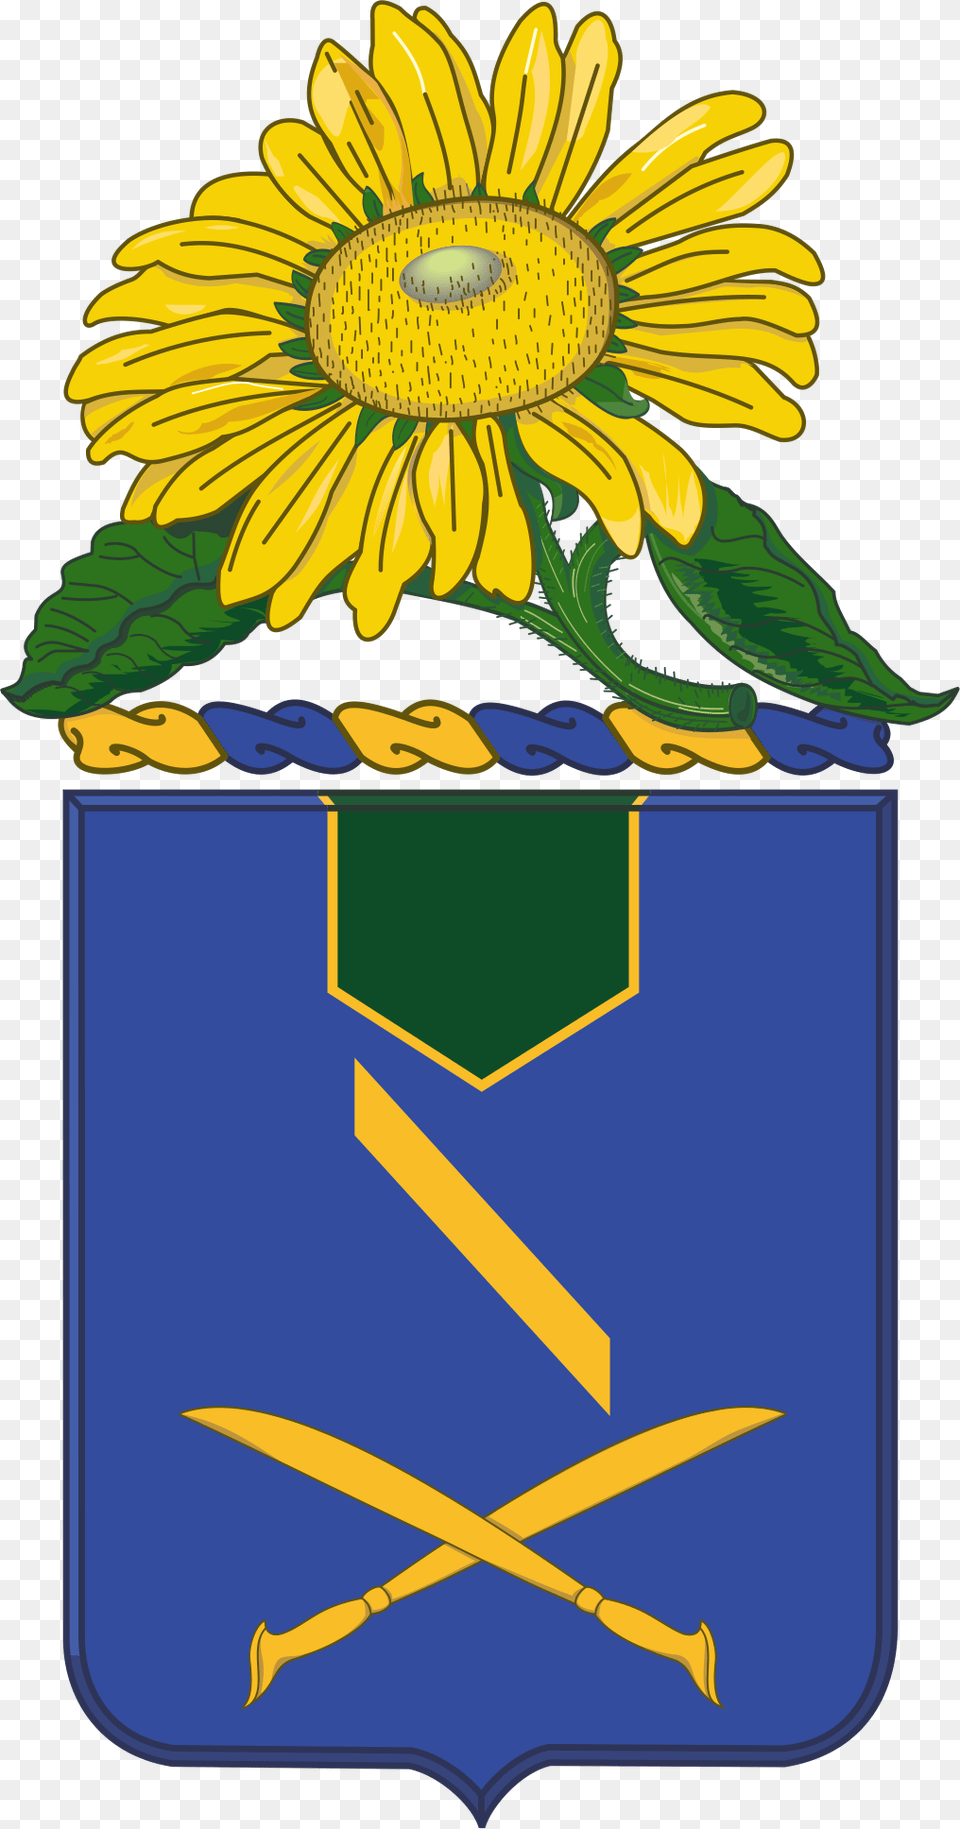 137th Infantry Regiment Coat Of Arms Company K 137th Infantry Regiment Wwi, Flower, Plant, Sunflower Png Image